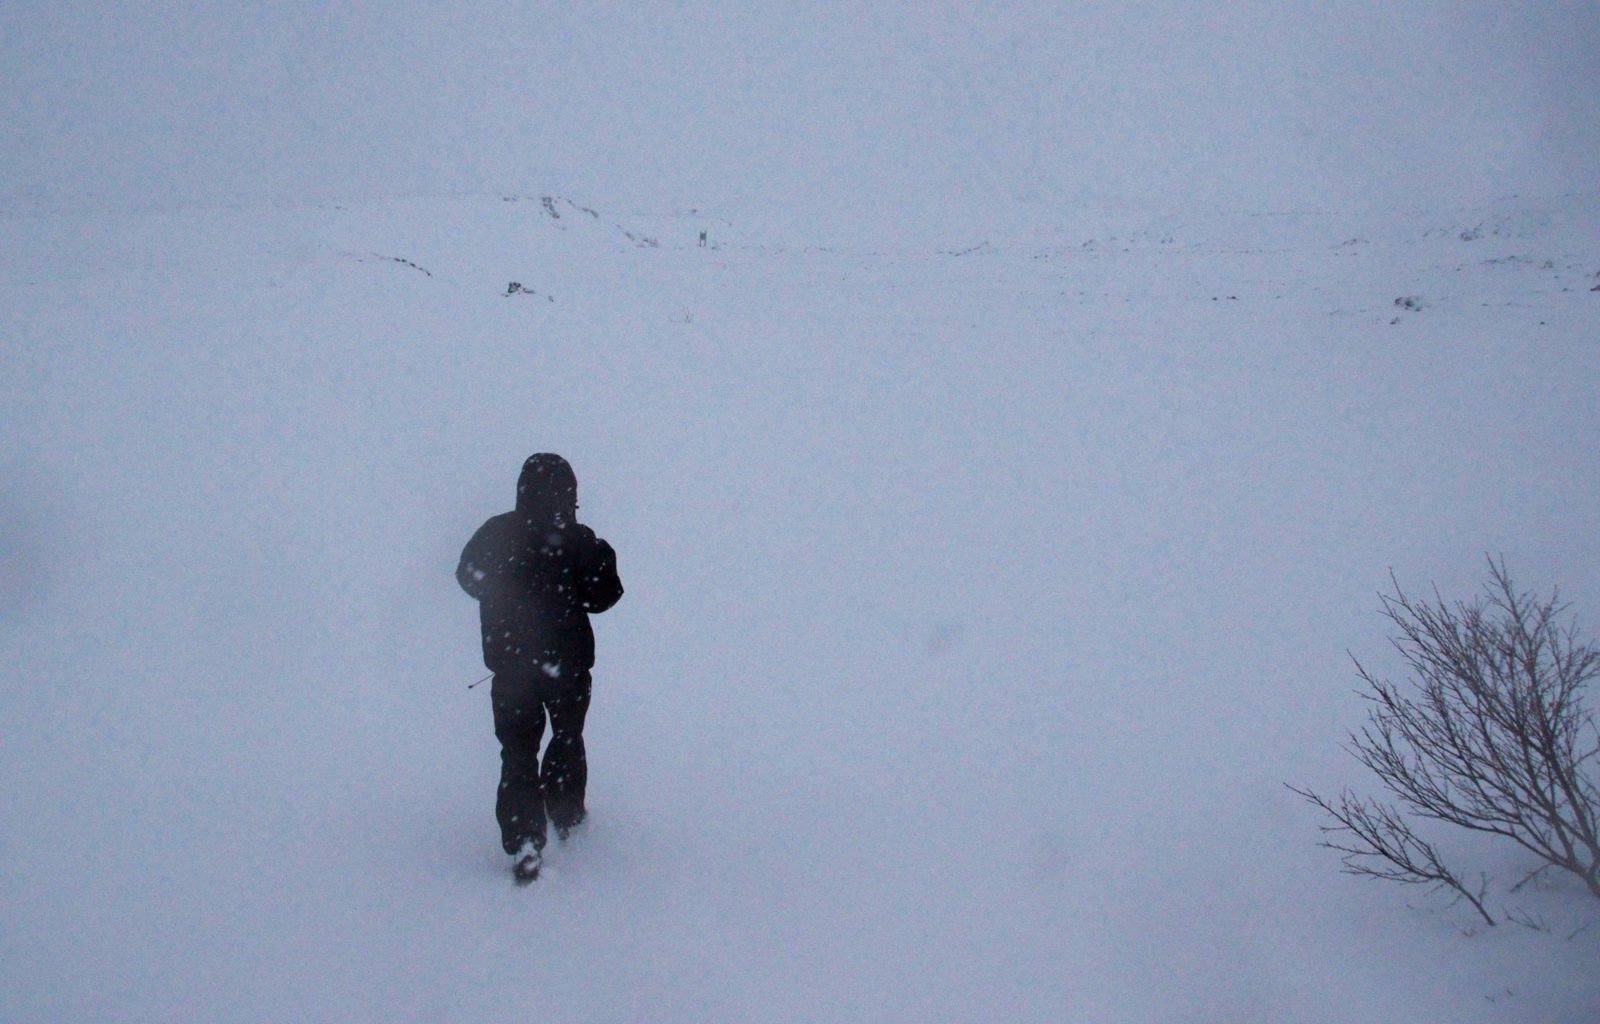 Magnus was walking fast in a place where the snow covered every inch of the land.